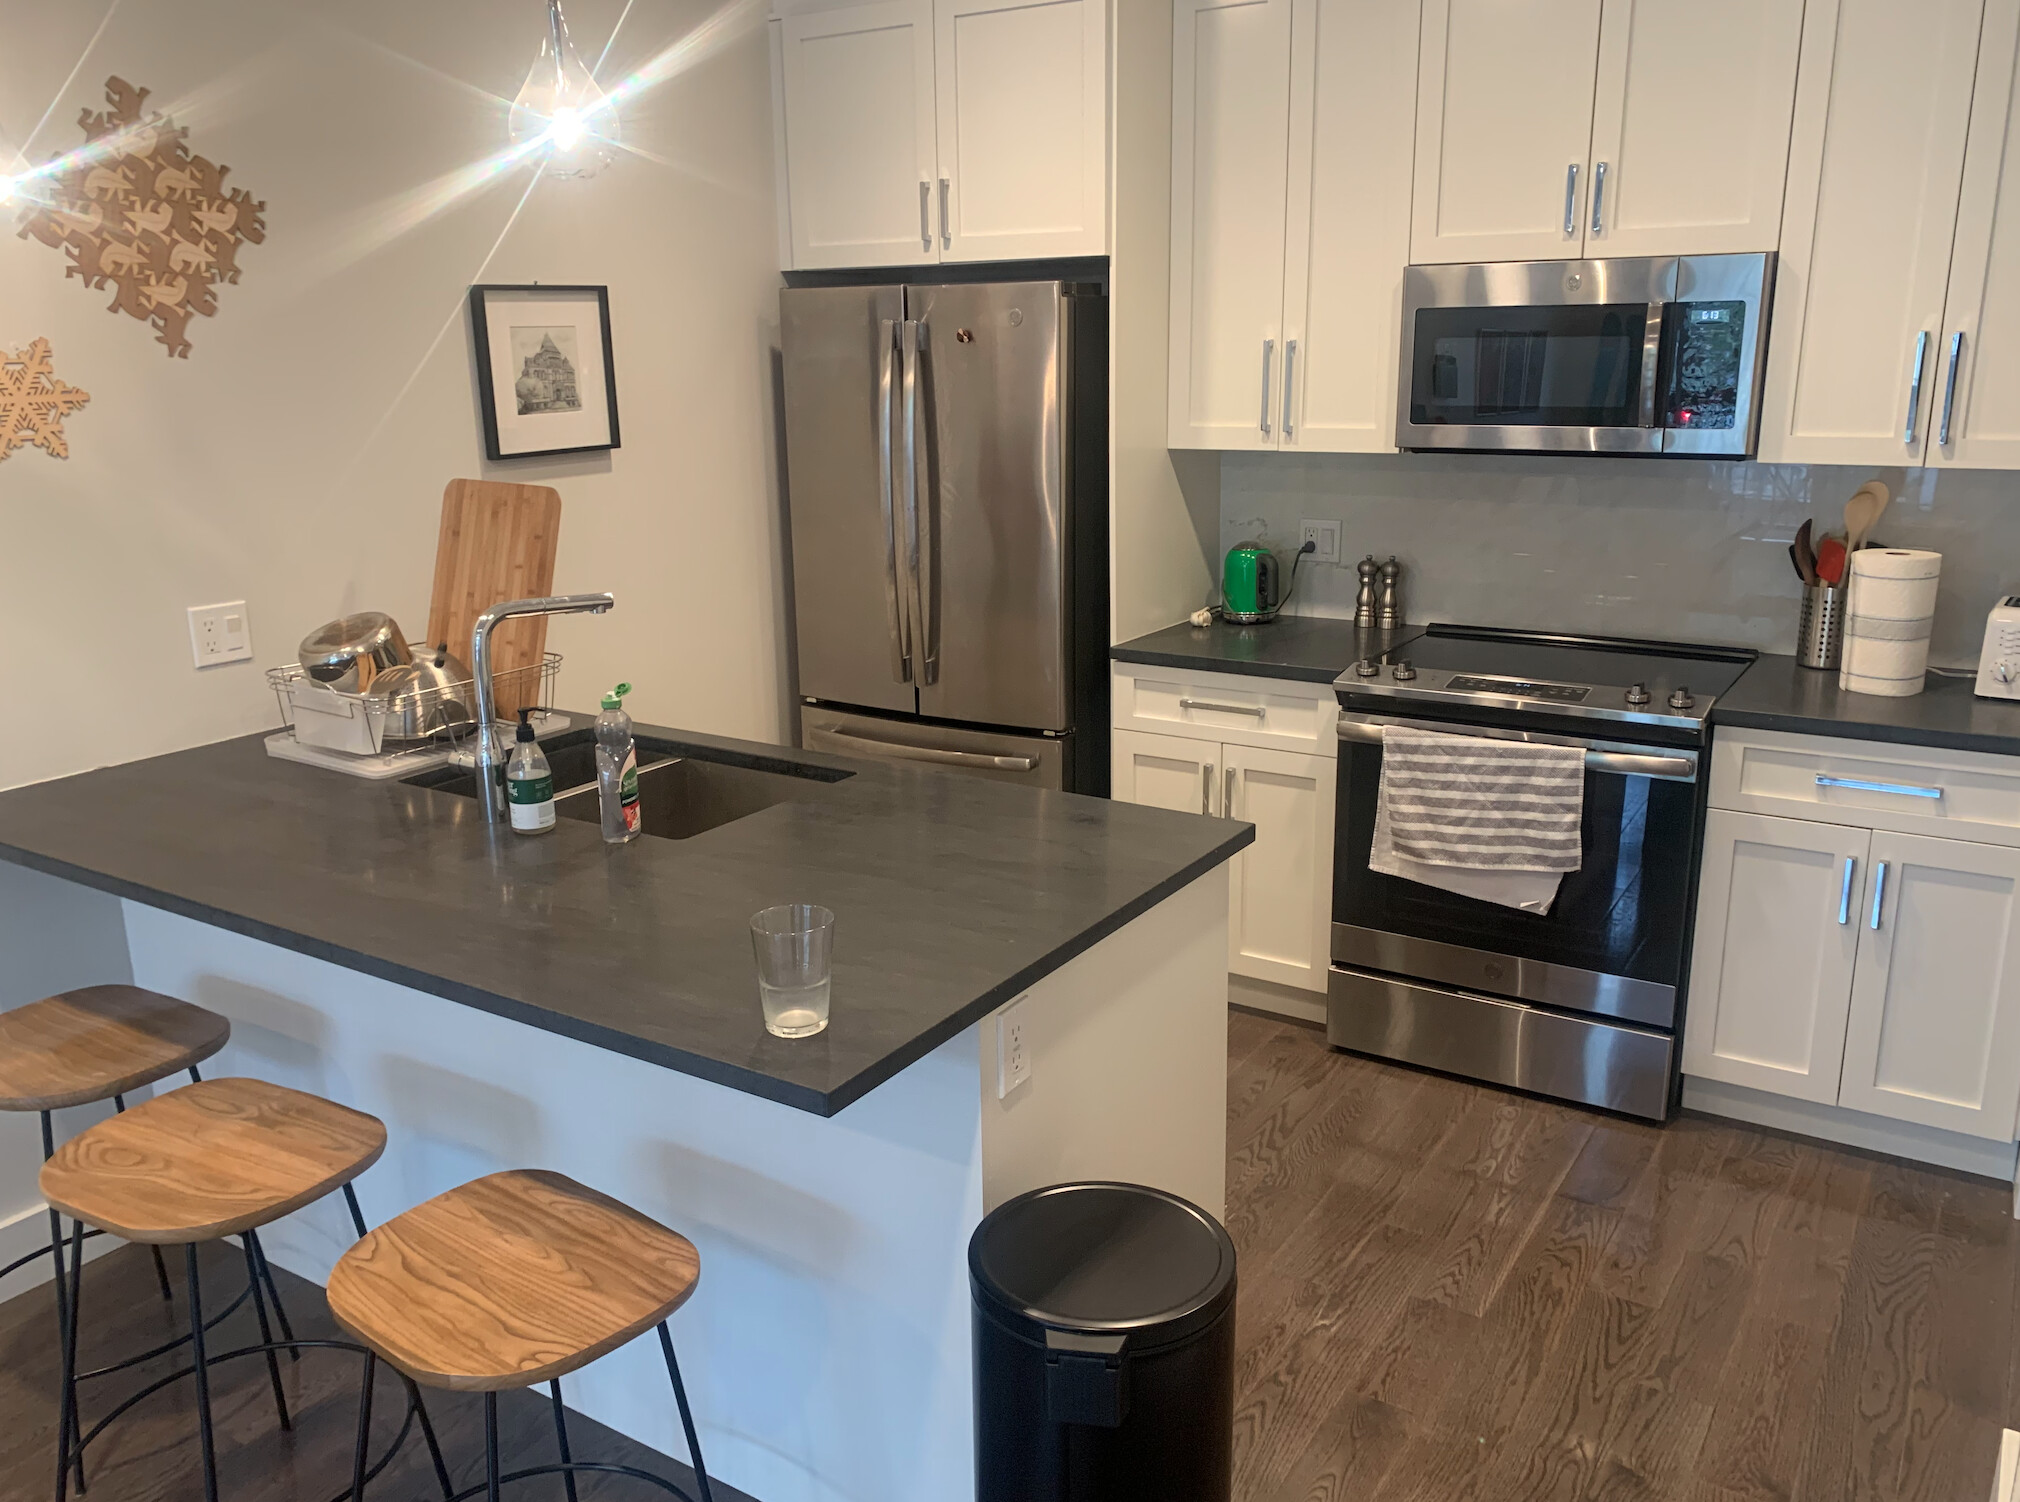 1 Bed, 1 Bath apartment in Somerville, Prospect Hill for $2,700